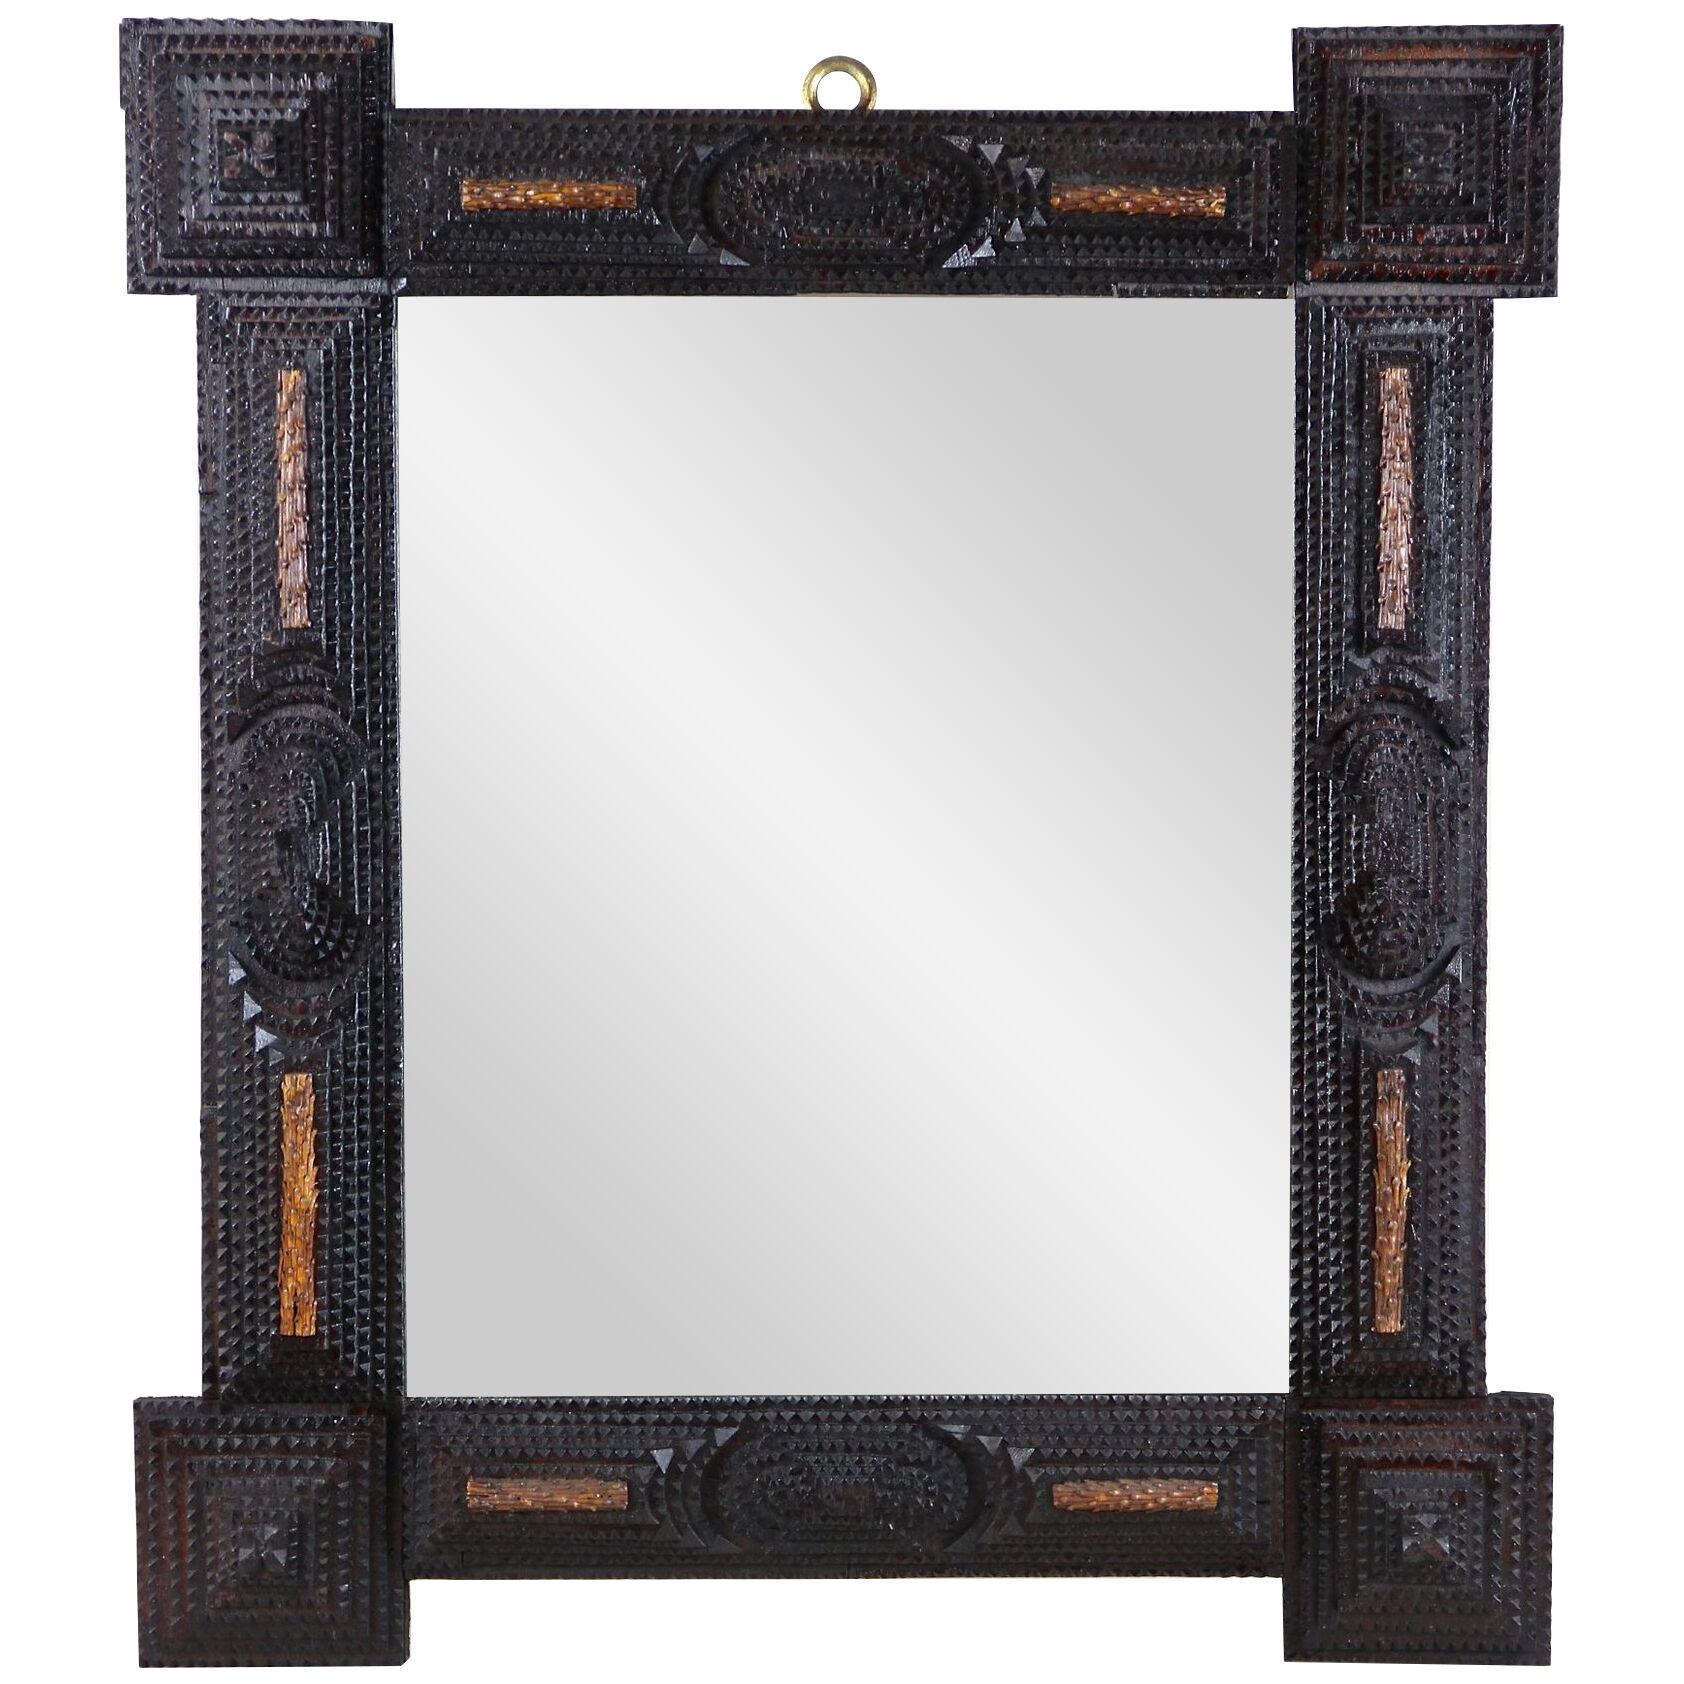 Rustic Tramp Art Wall Mirror With Spruce Branches, Austria circa 1890